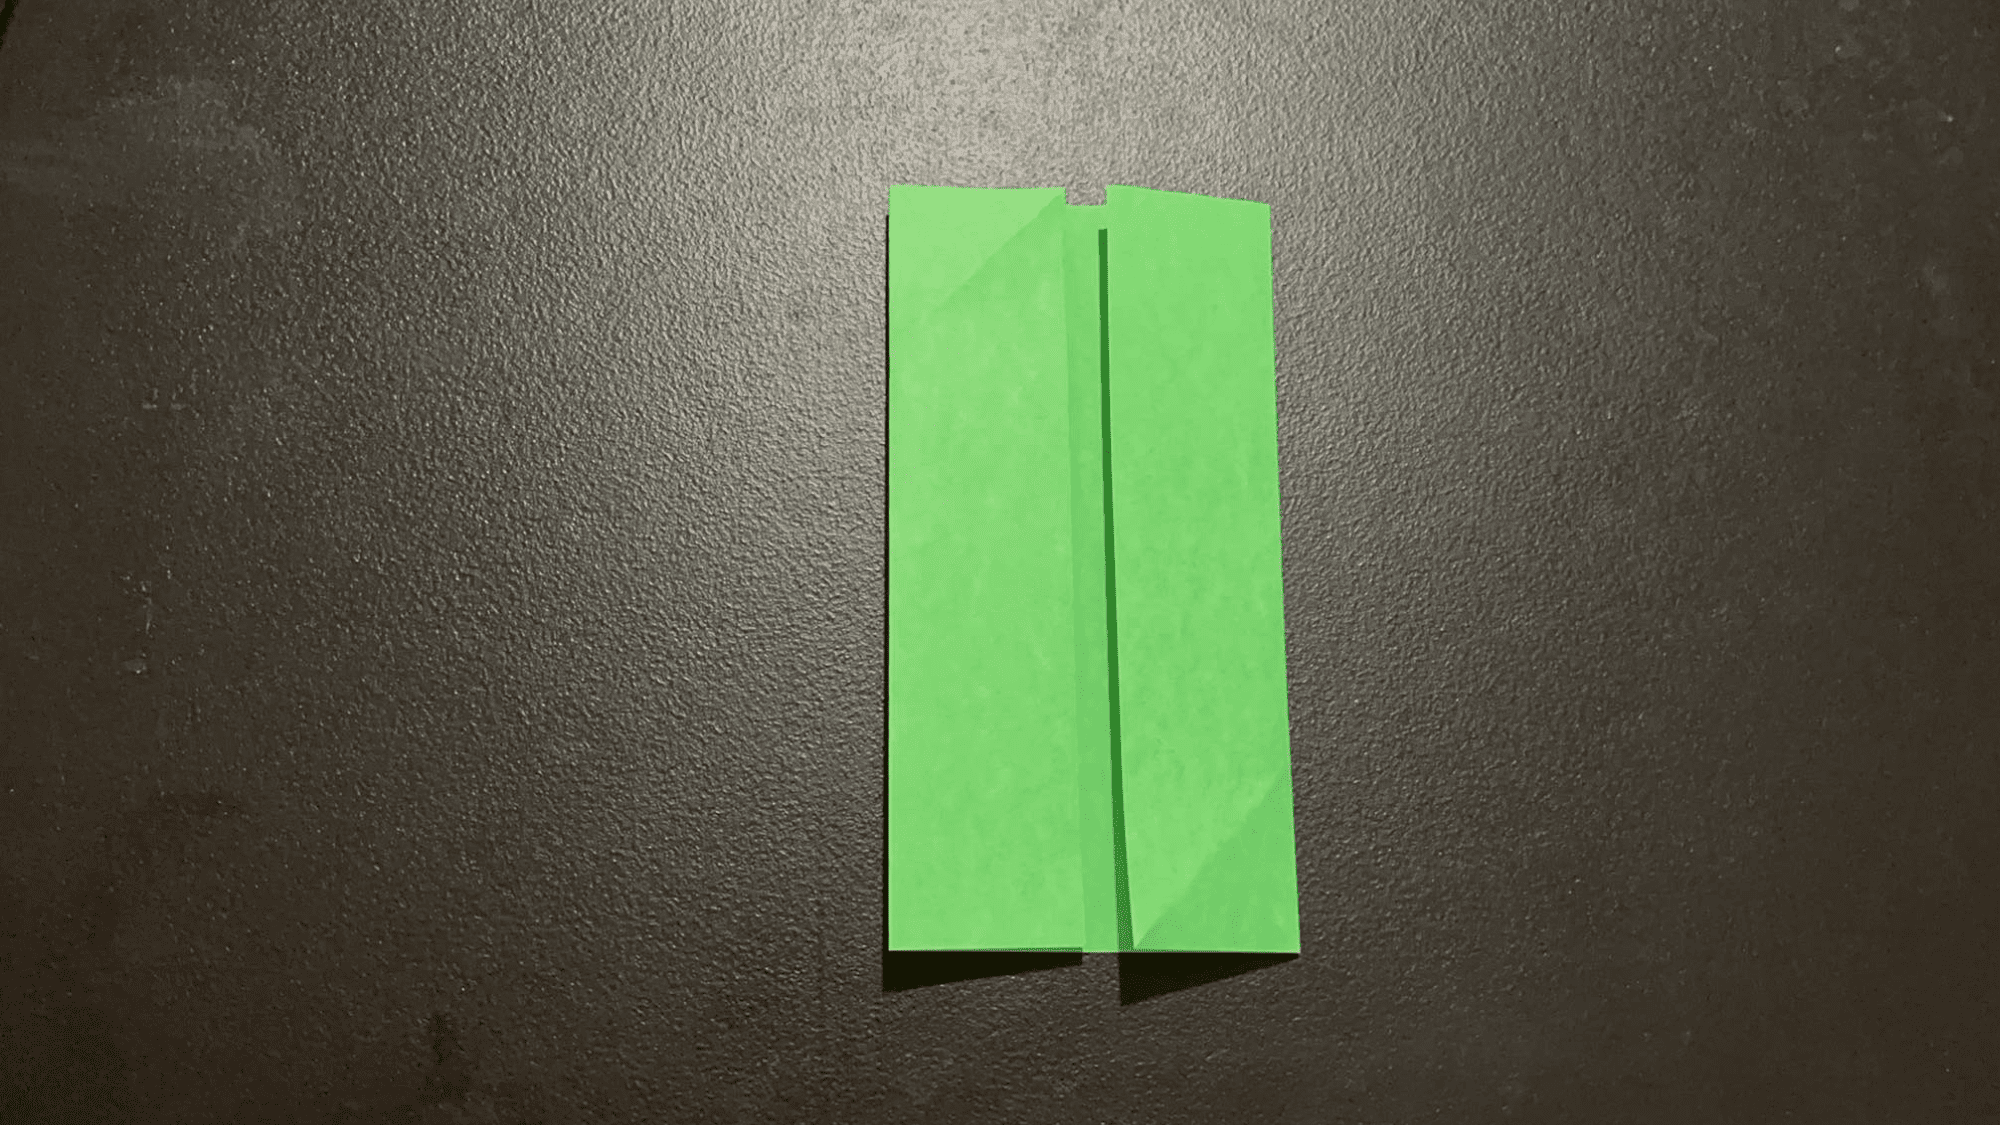 origami gift card holder instructions step 3.1